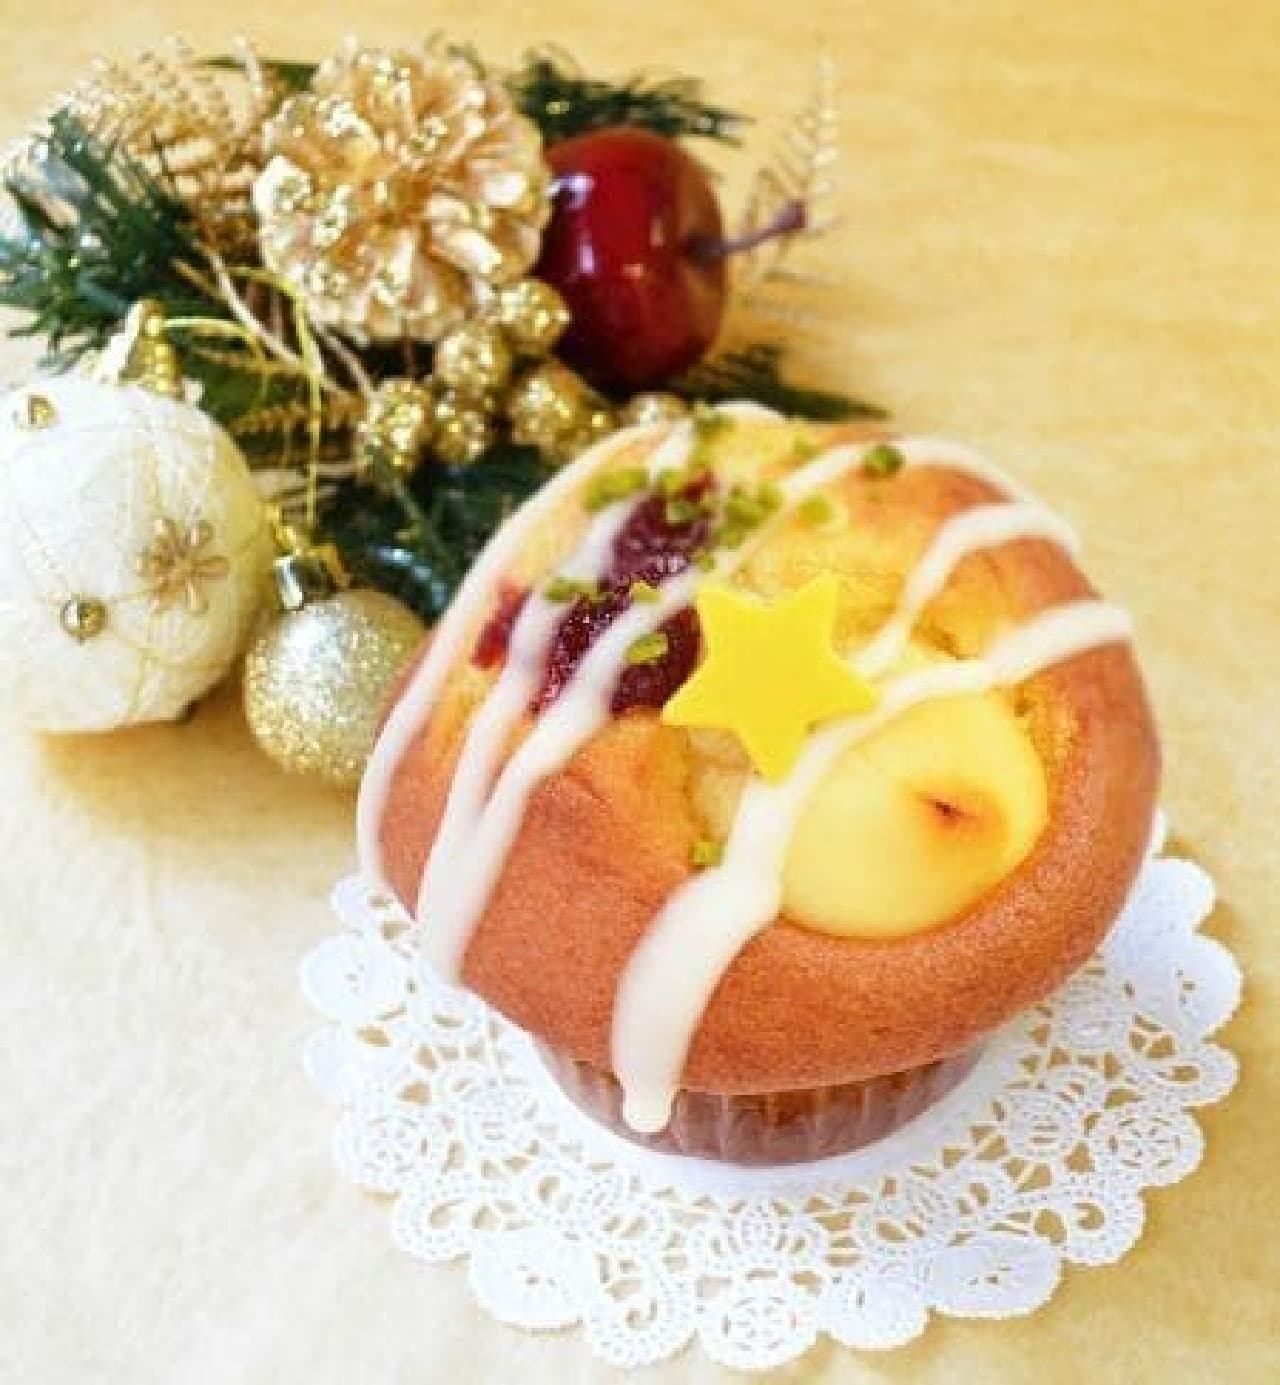 A muffin only for this season that adds flowers to the table